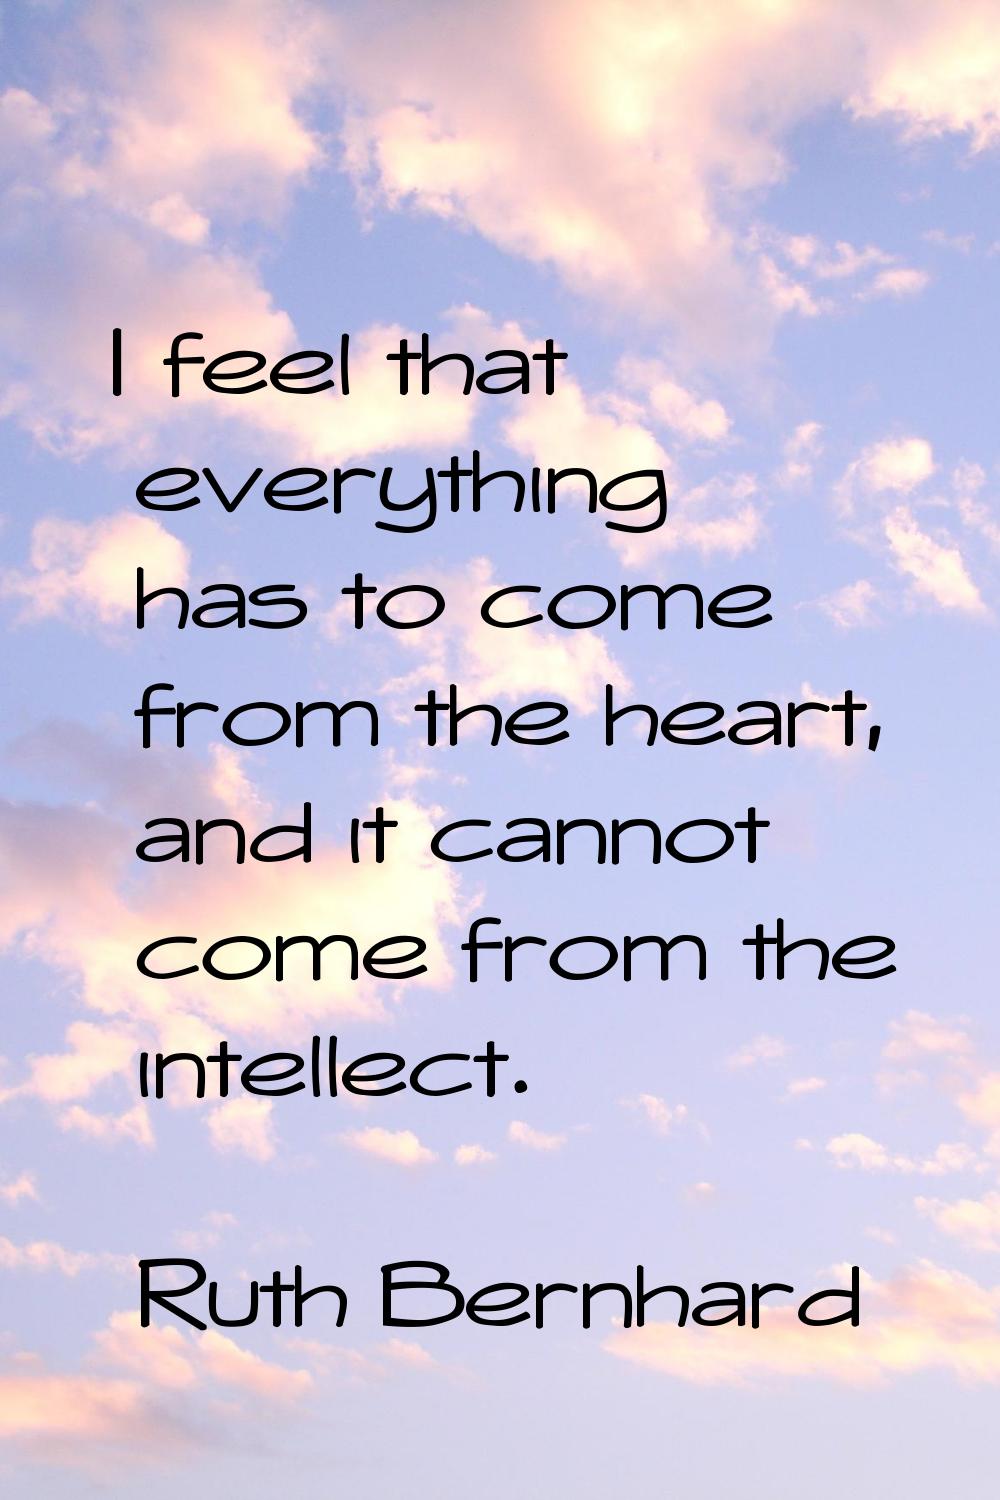 I feel that everything has to come from the heart, and it cannot come from the intellect.